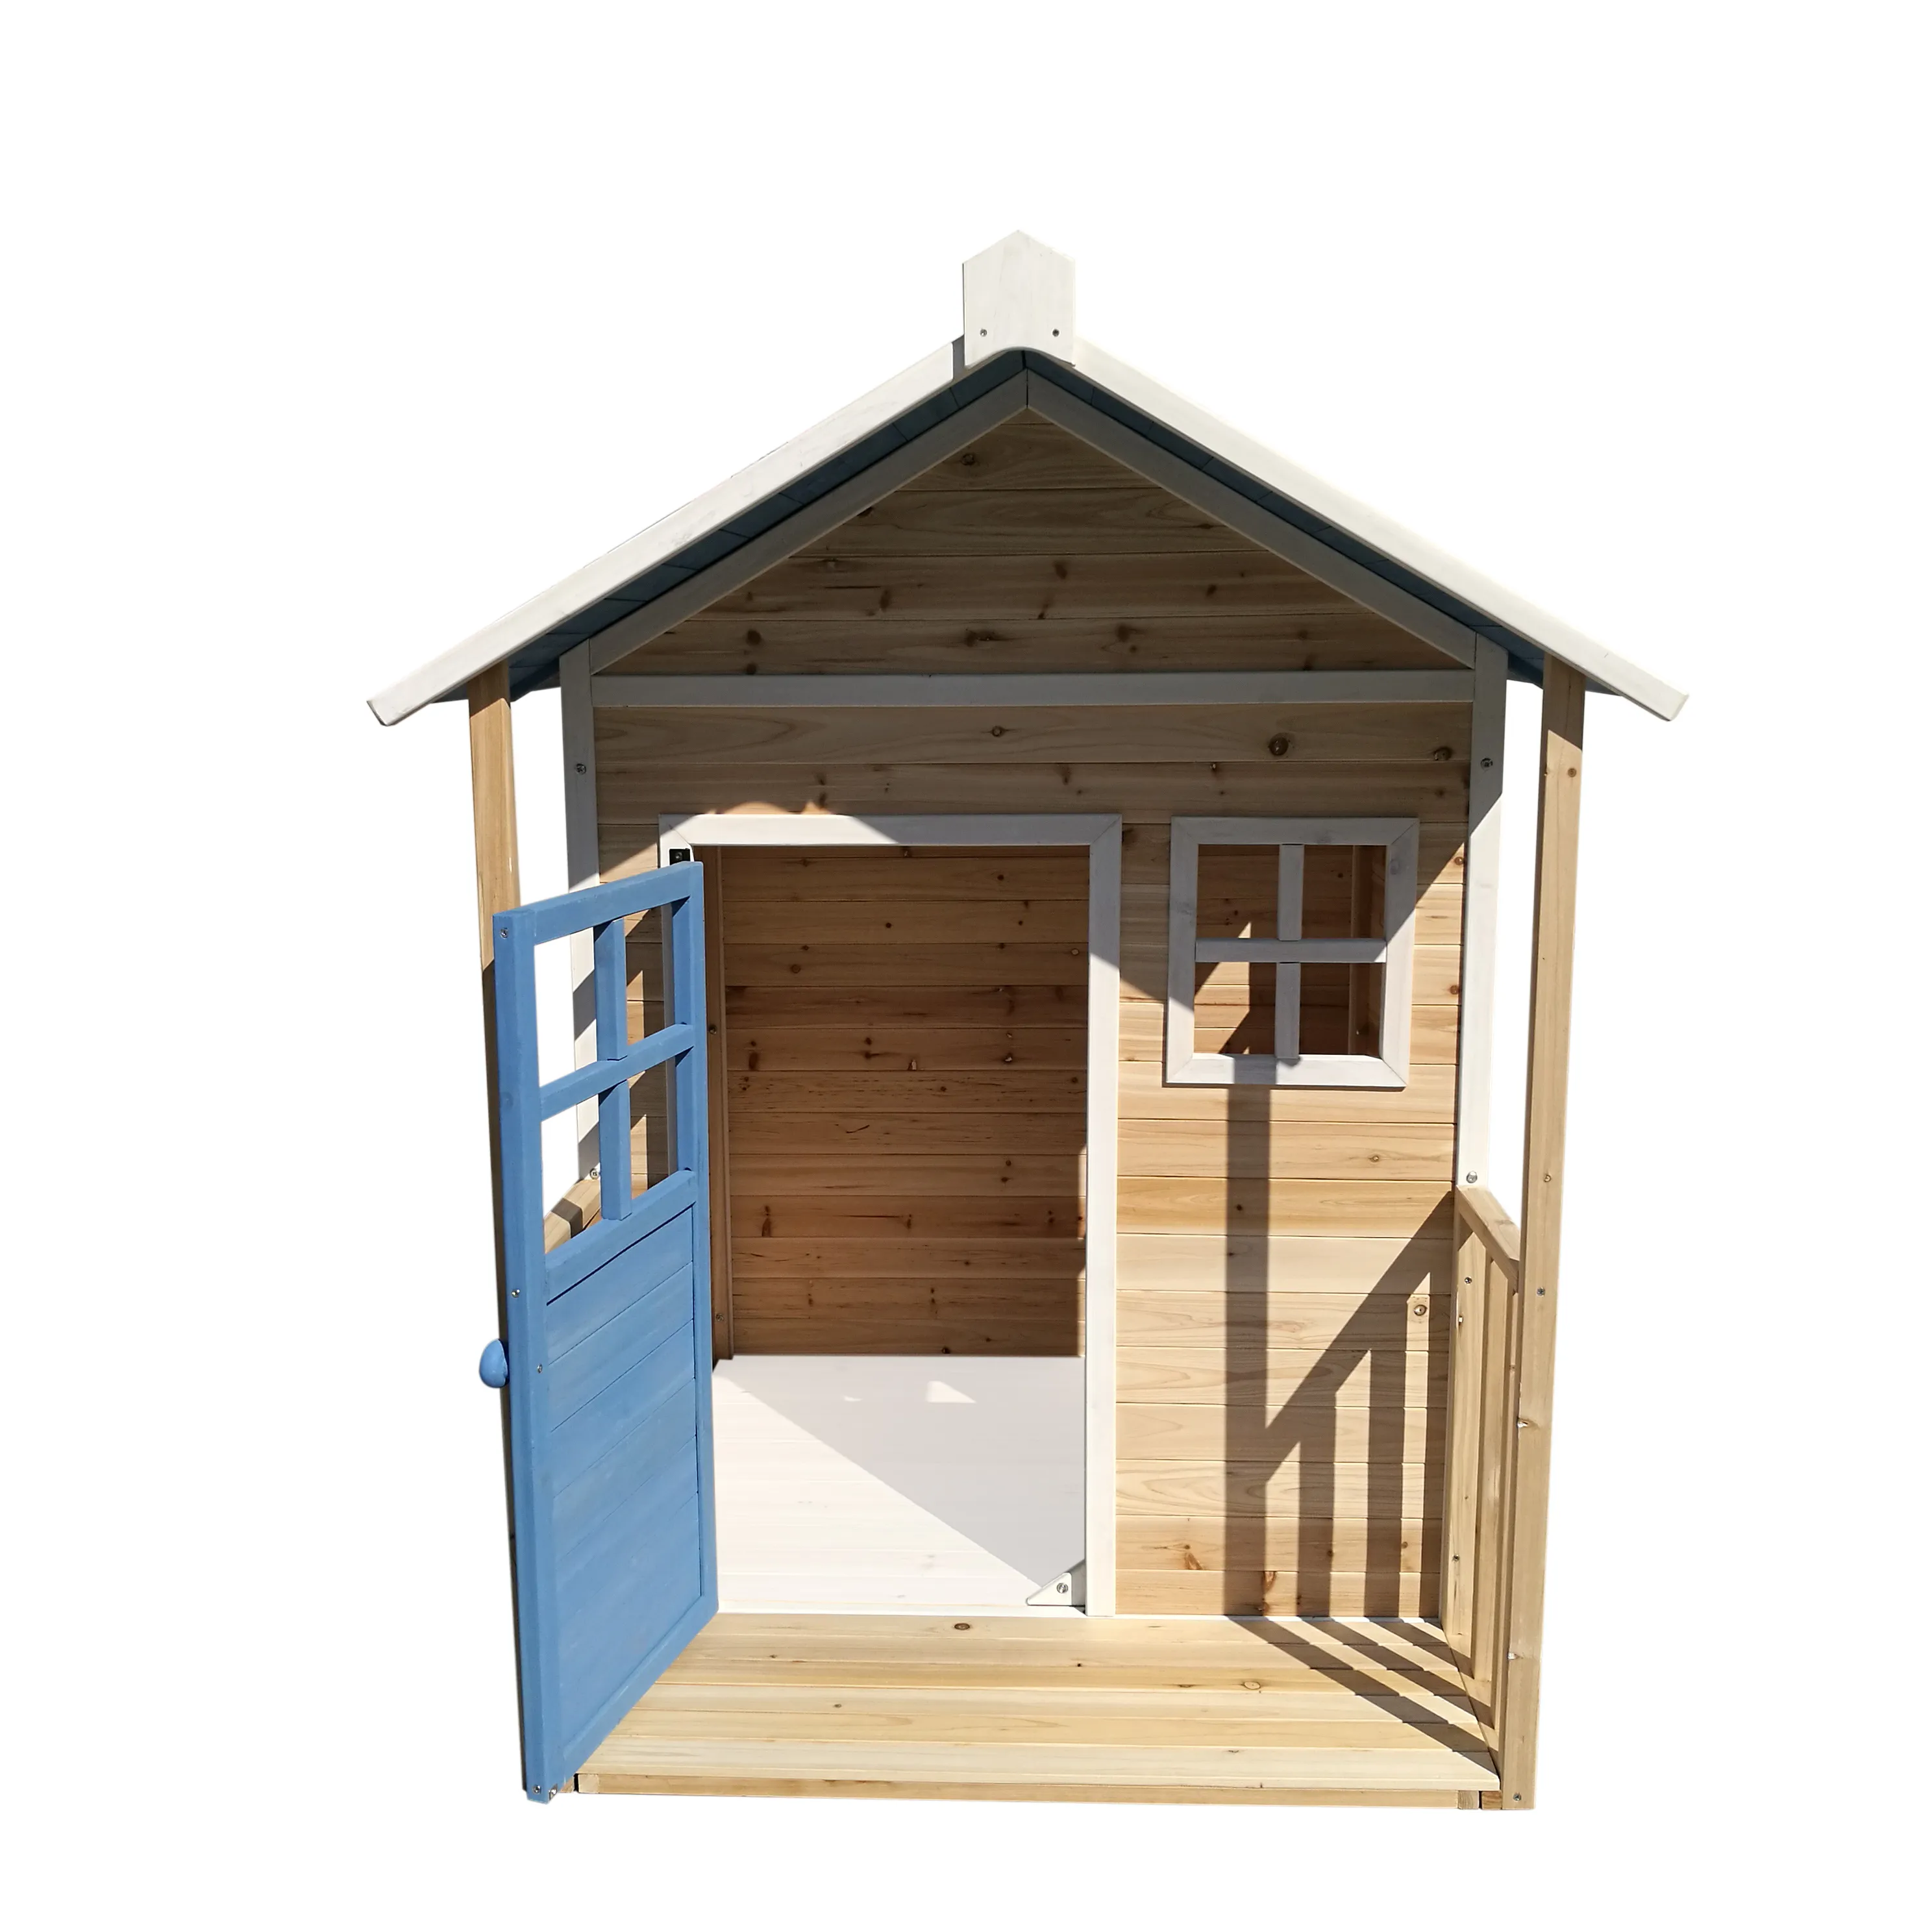 Simple Play house with balcony Modern white and blue wood cubby house Outdoor Children's wooden Playhouse for Kids